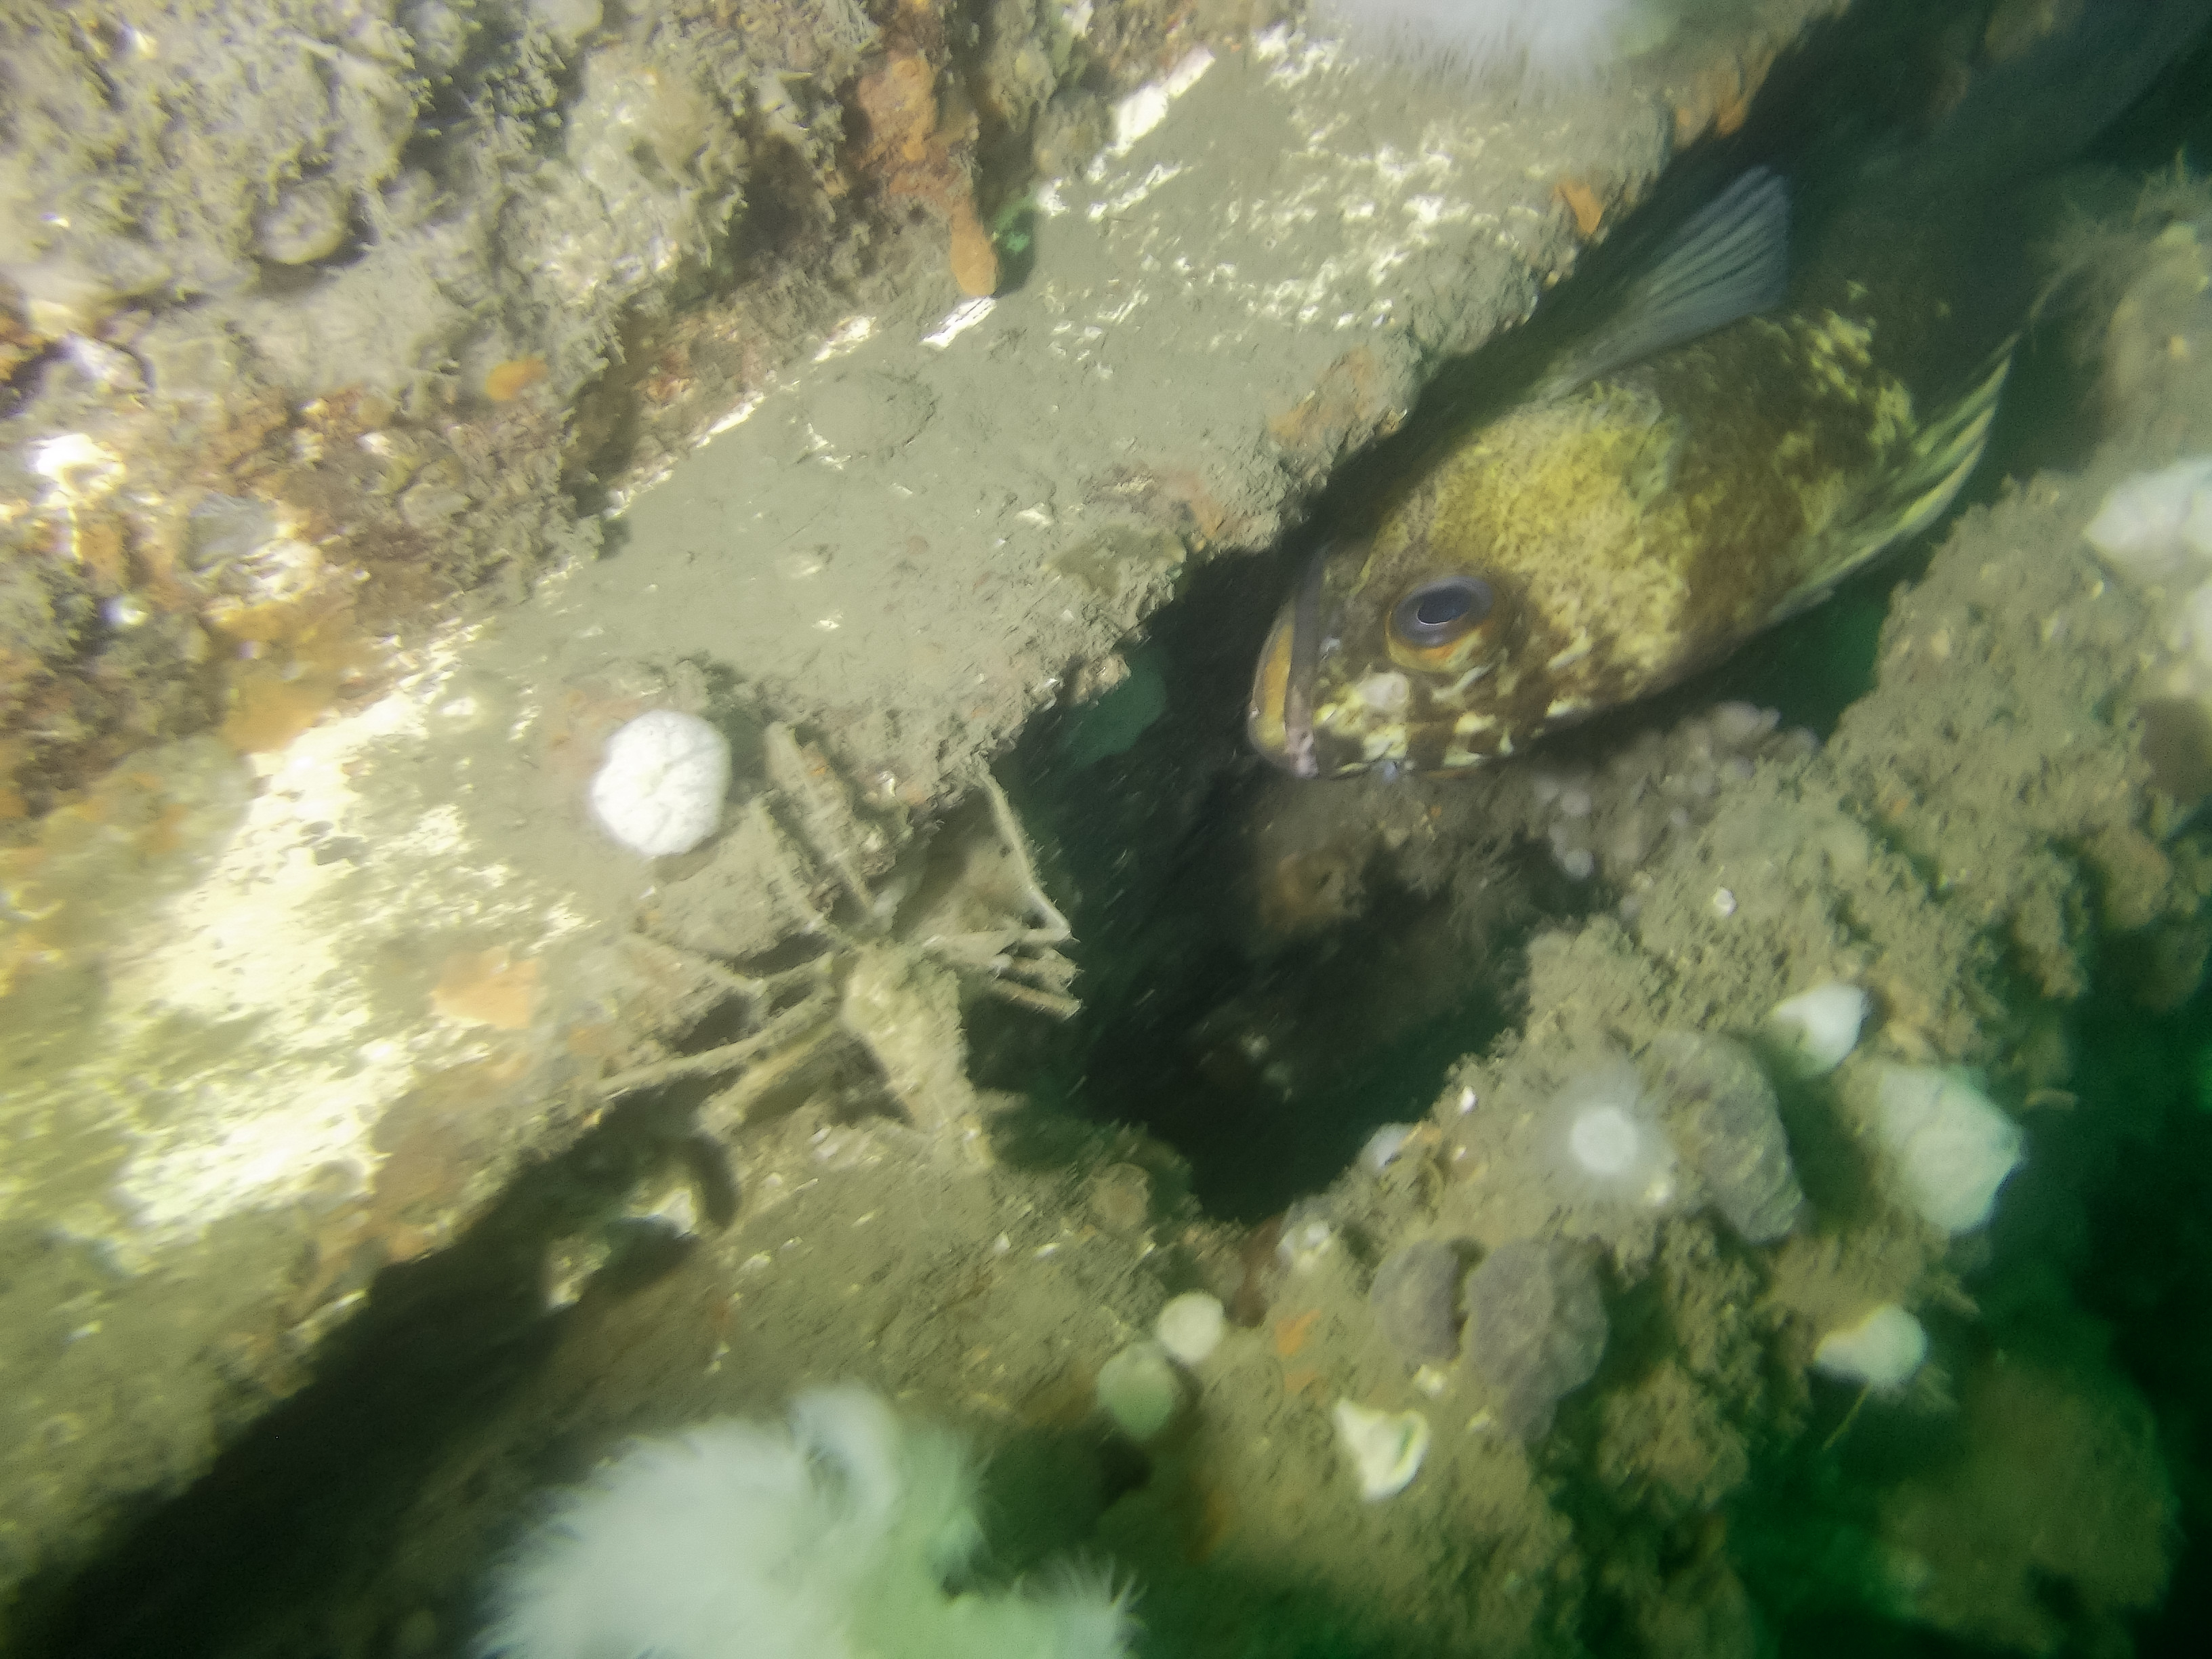 Rockfish and unwanted visitor - GB Church